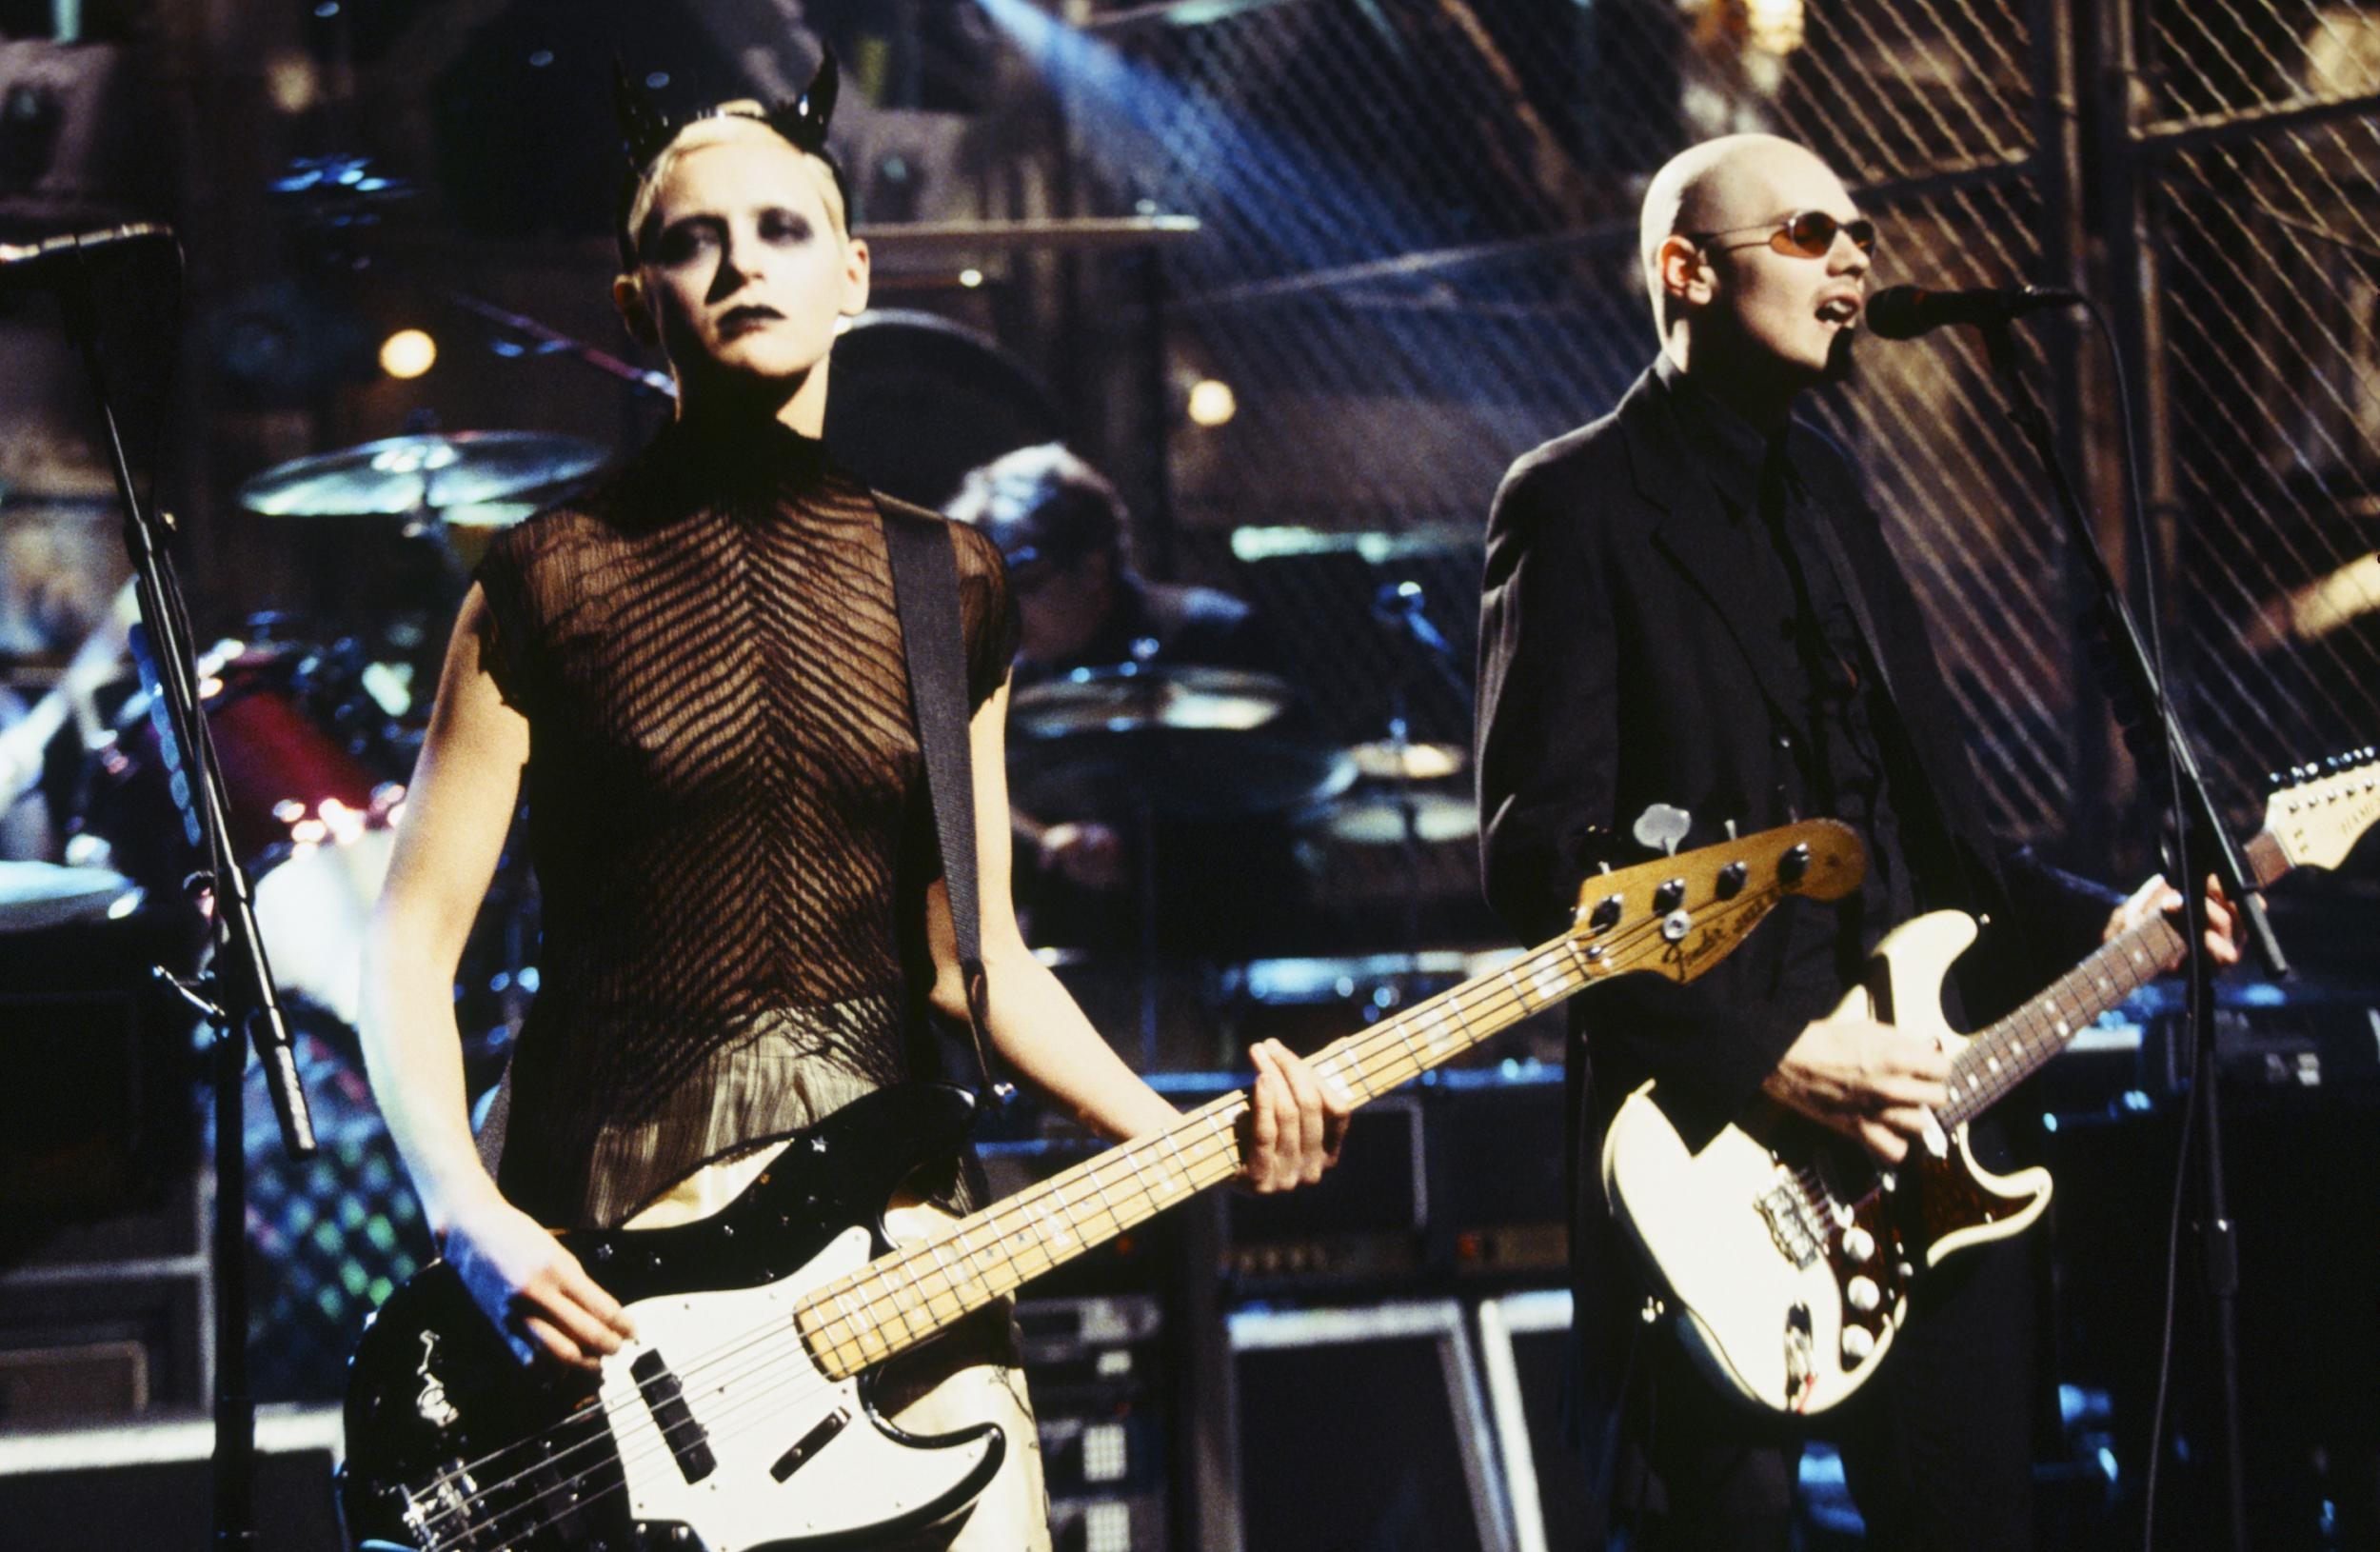 D'Arcy Wretzky performing with Billy Corgan in 1998. Credit: Getty